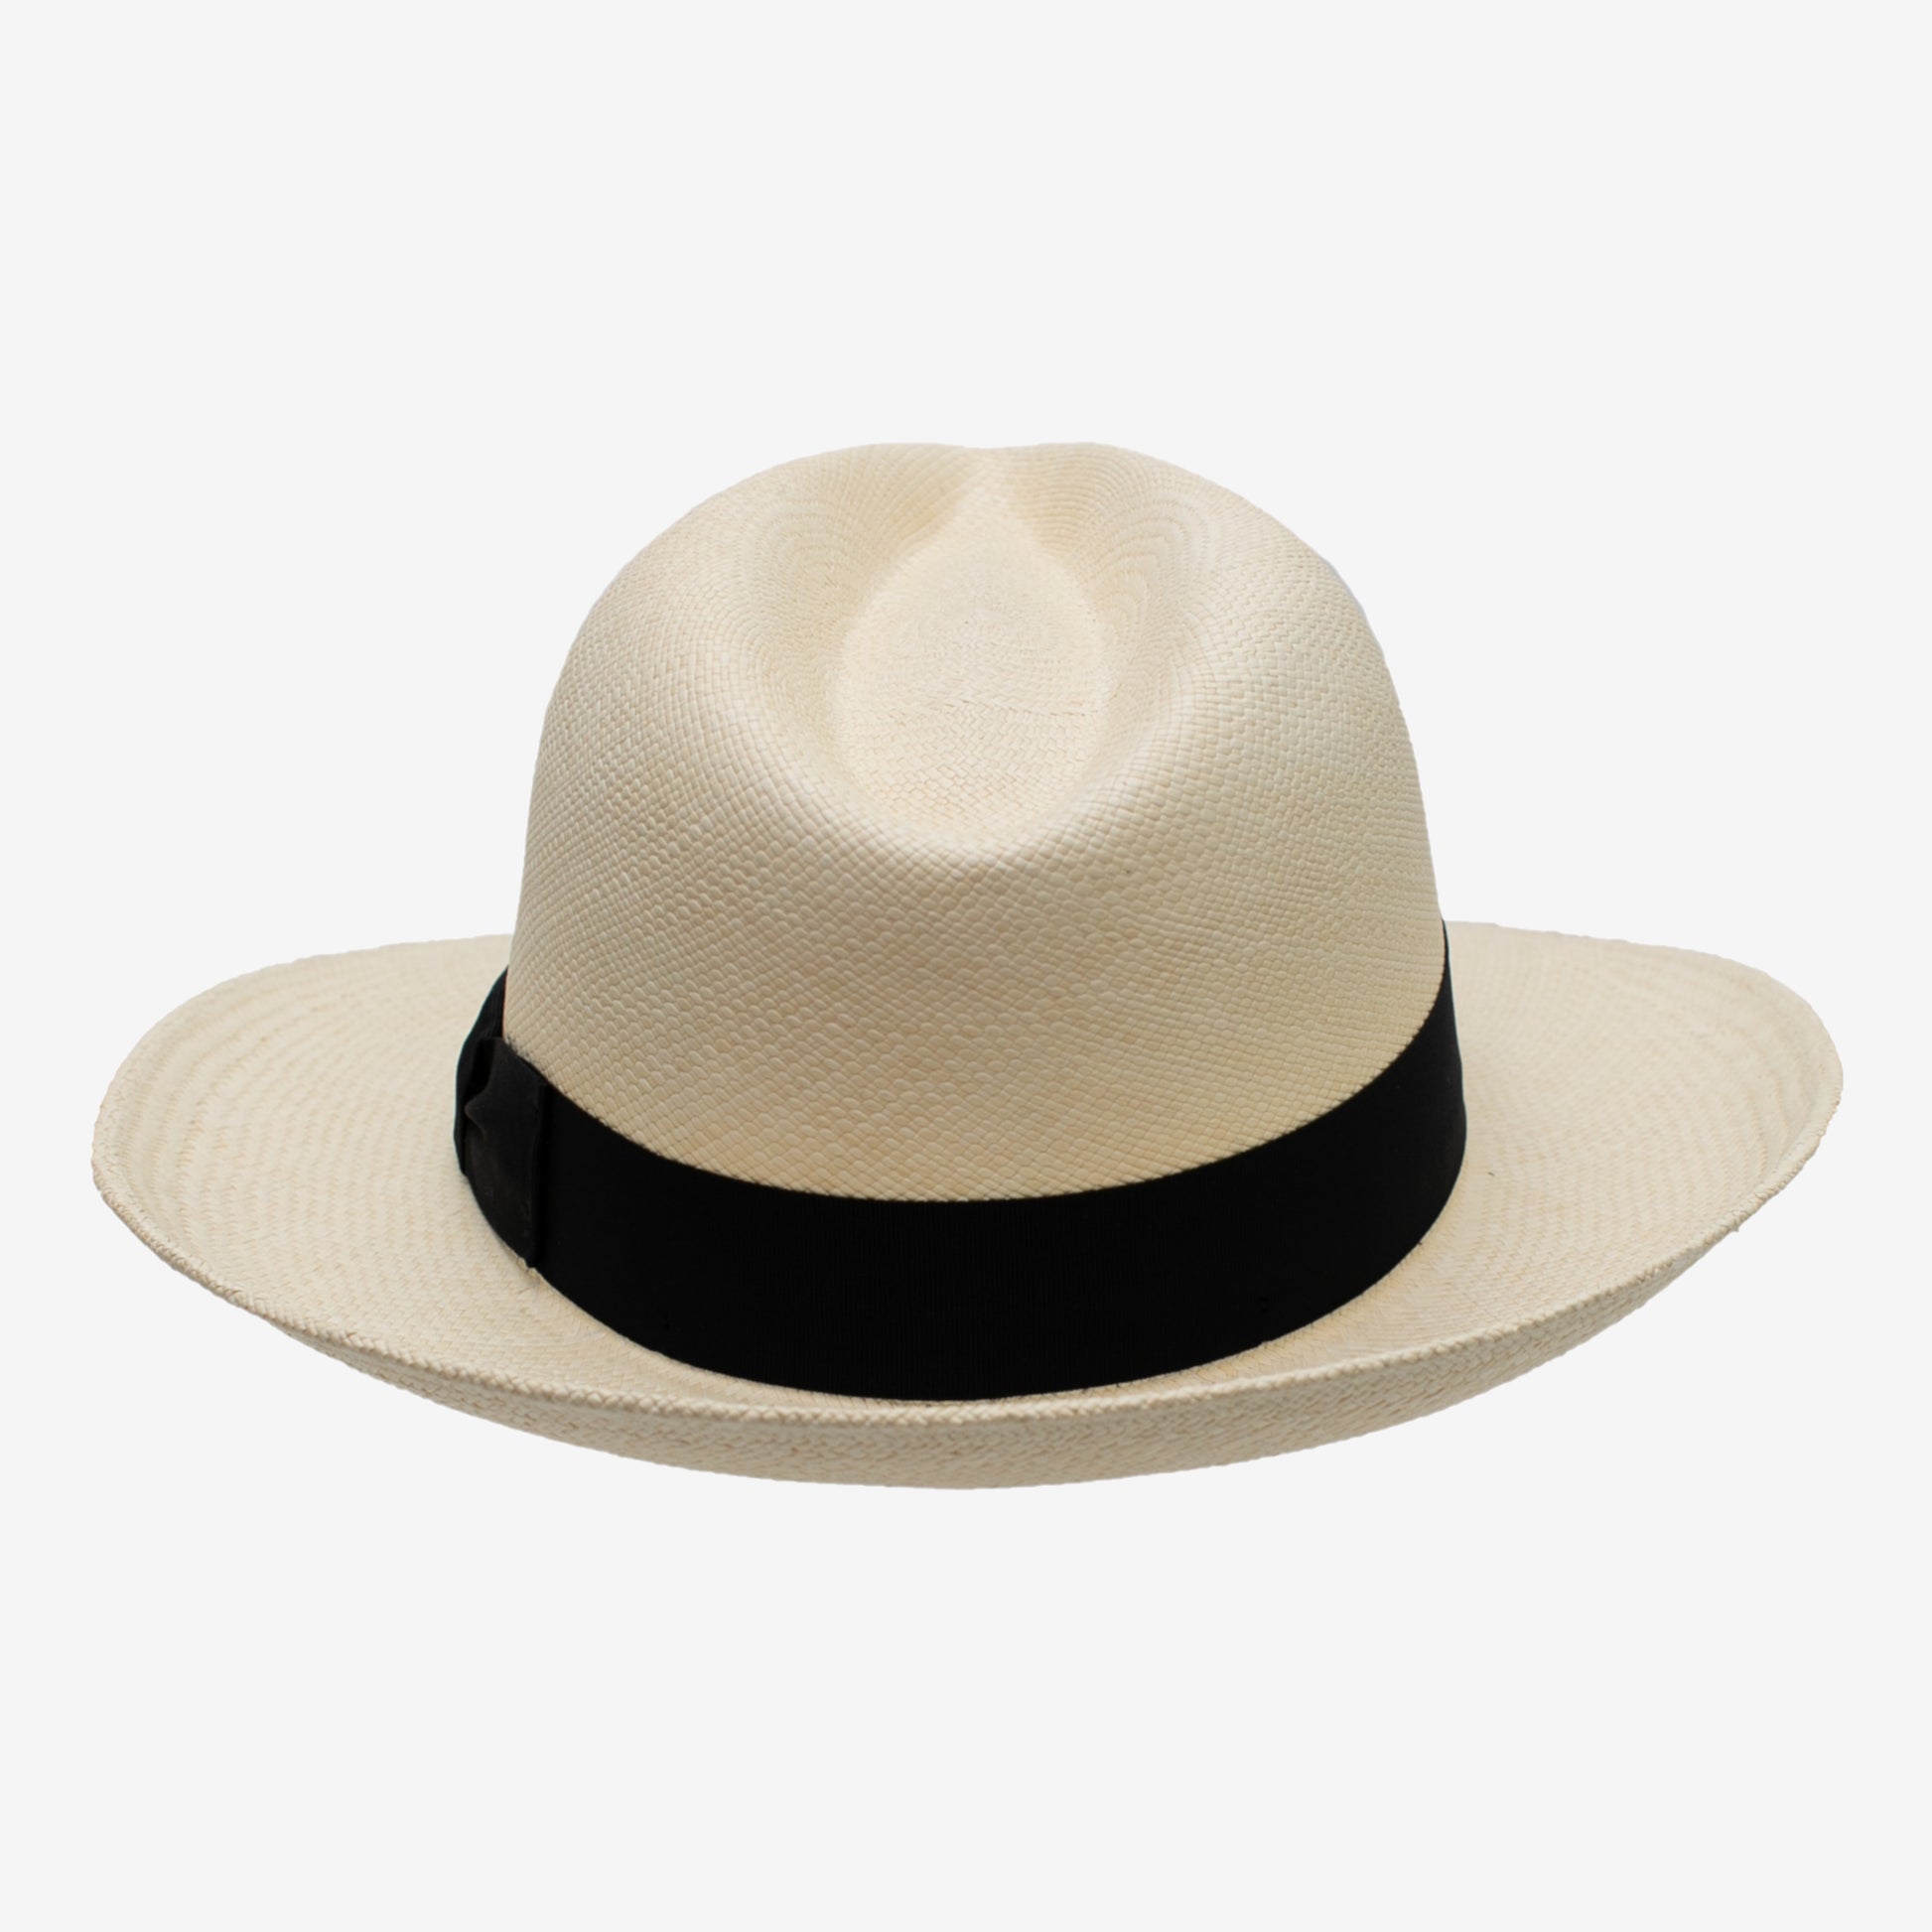 mindo-hats-the-don-galo-classic-straw-panama-hat-natural-back